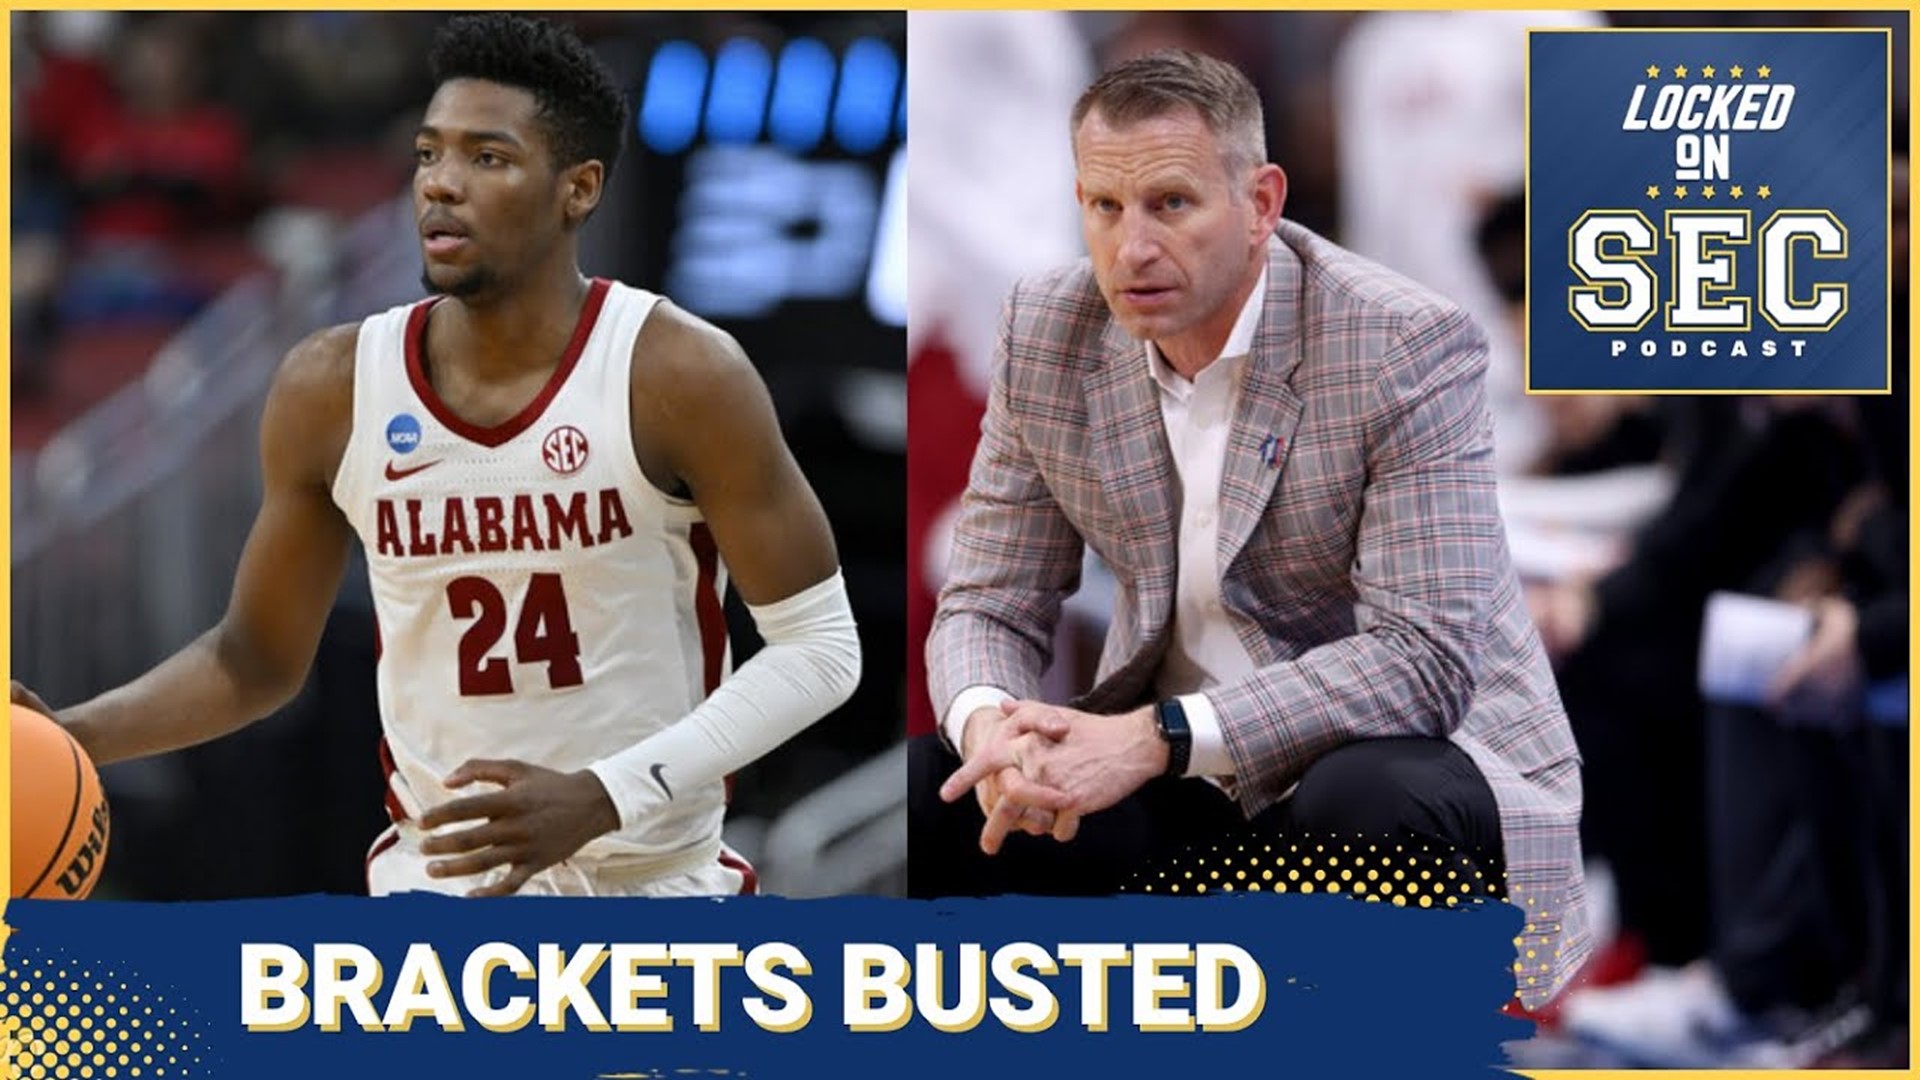 Every SEC Team Eliminated in Sweet 16 Round, Spring FBl Updates, Recruiting News, Baseball Roundup